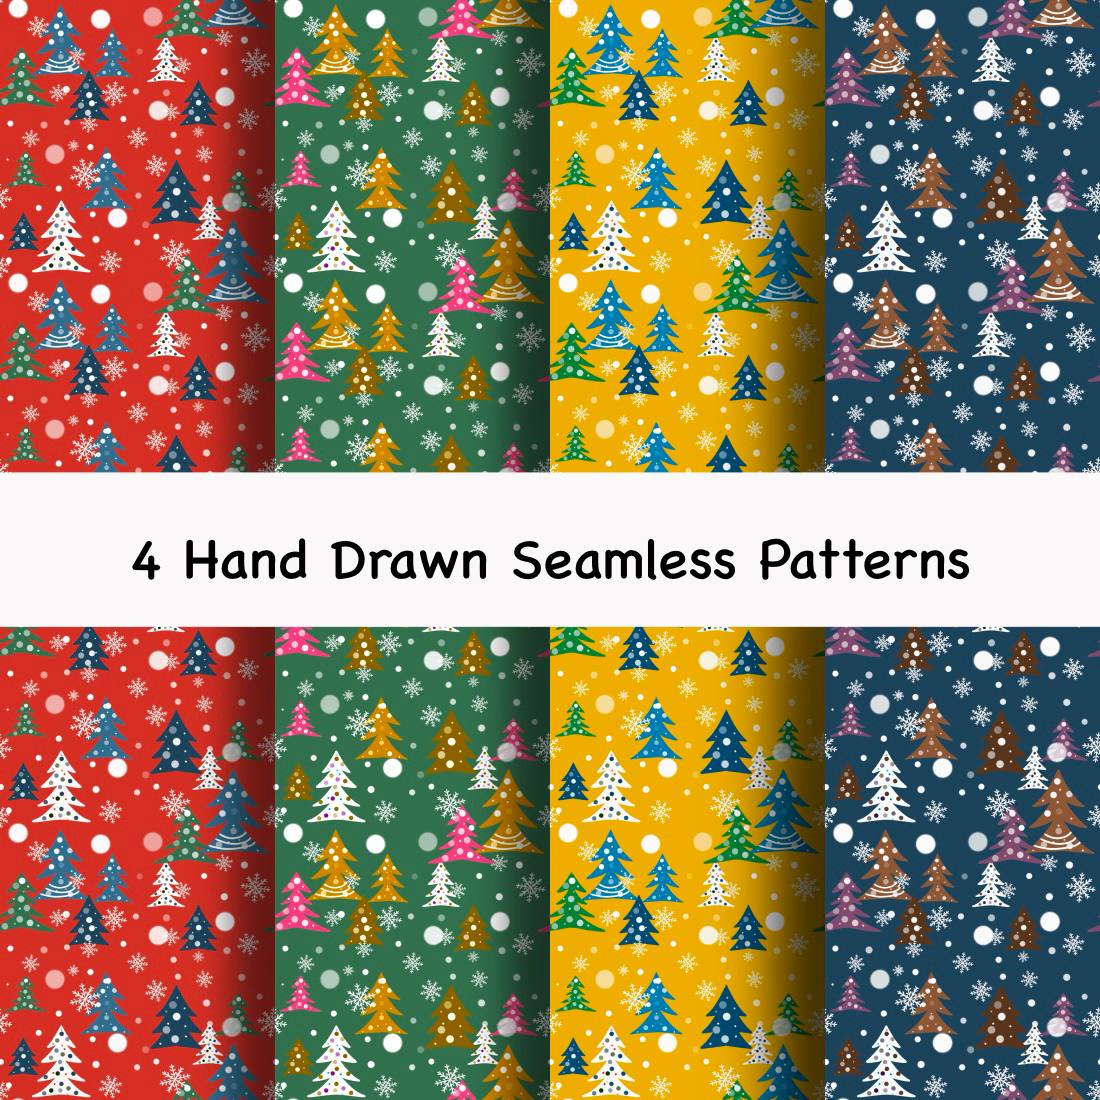 4 Seamless Hand Drawn Patterns Christmas trees herringbone preview image.